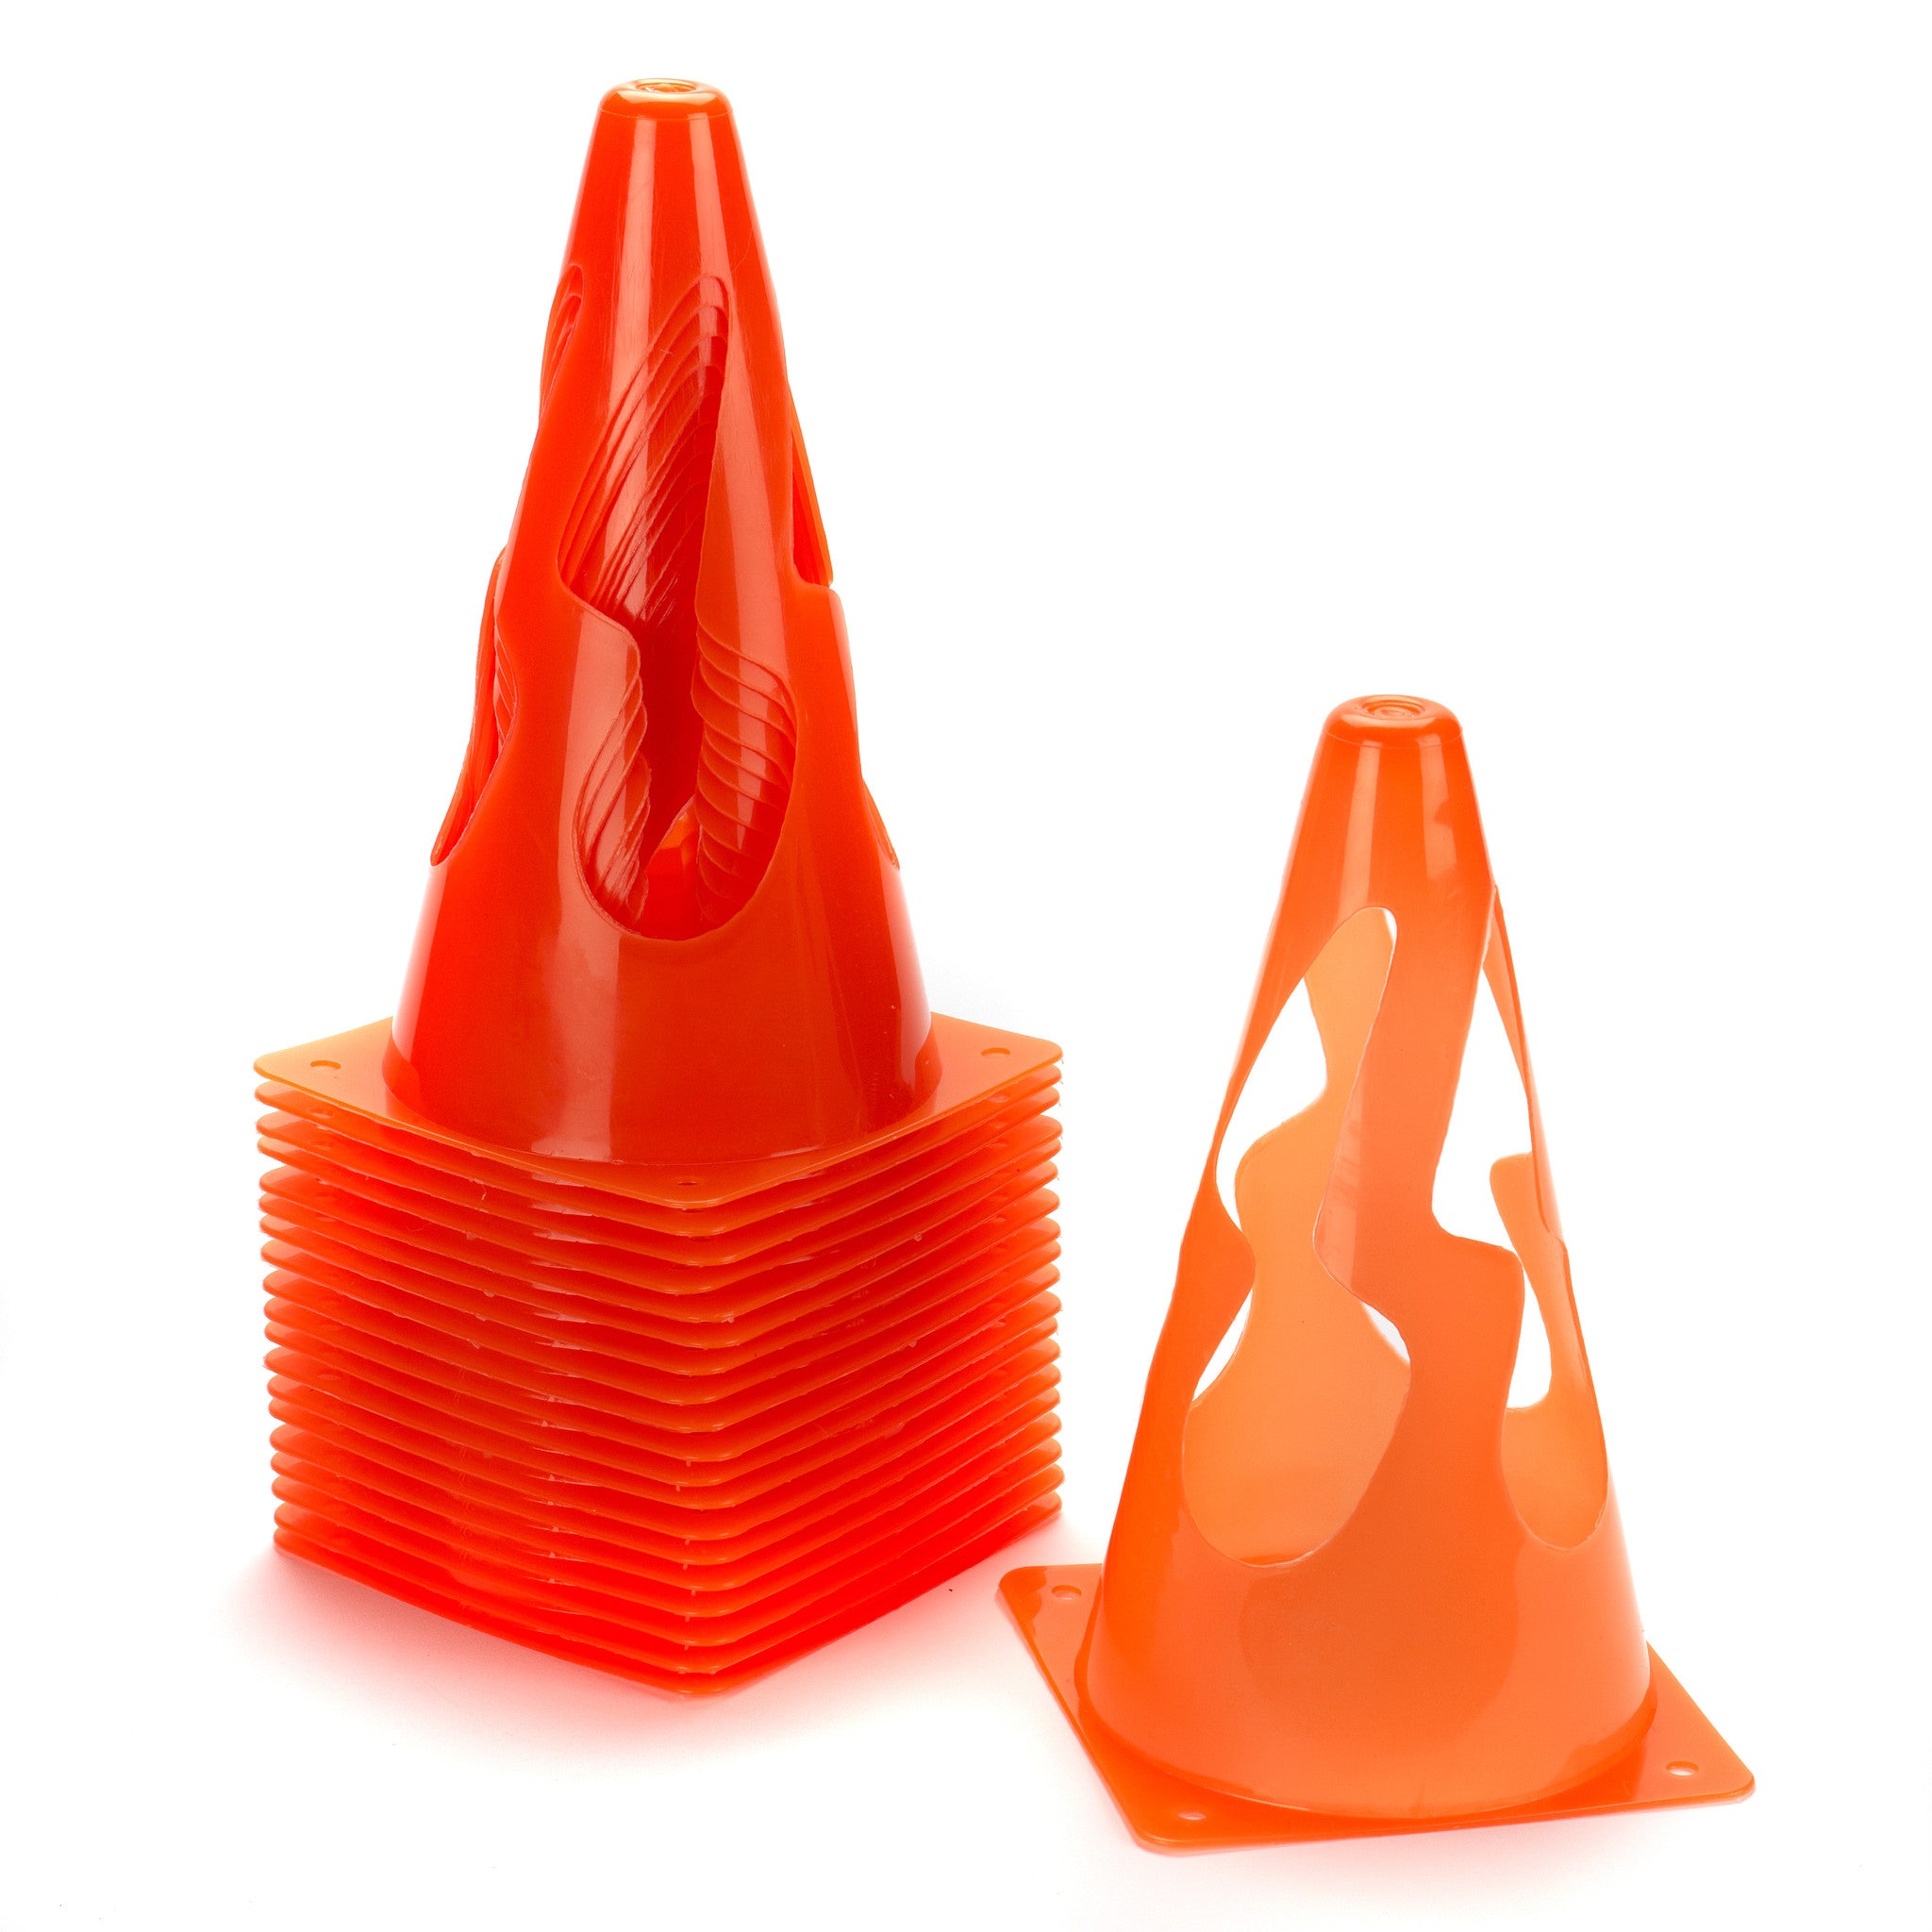 Set of 20 sports marker cones which collapse when trodden on making a safe option for children's classes.